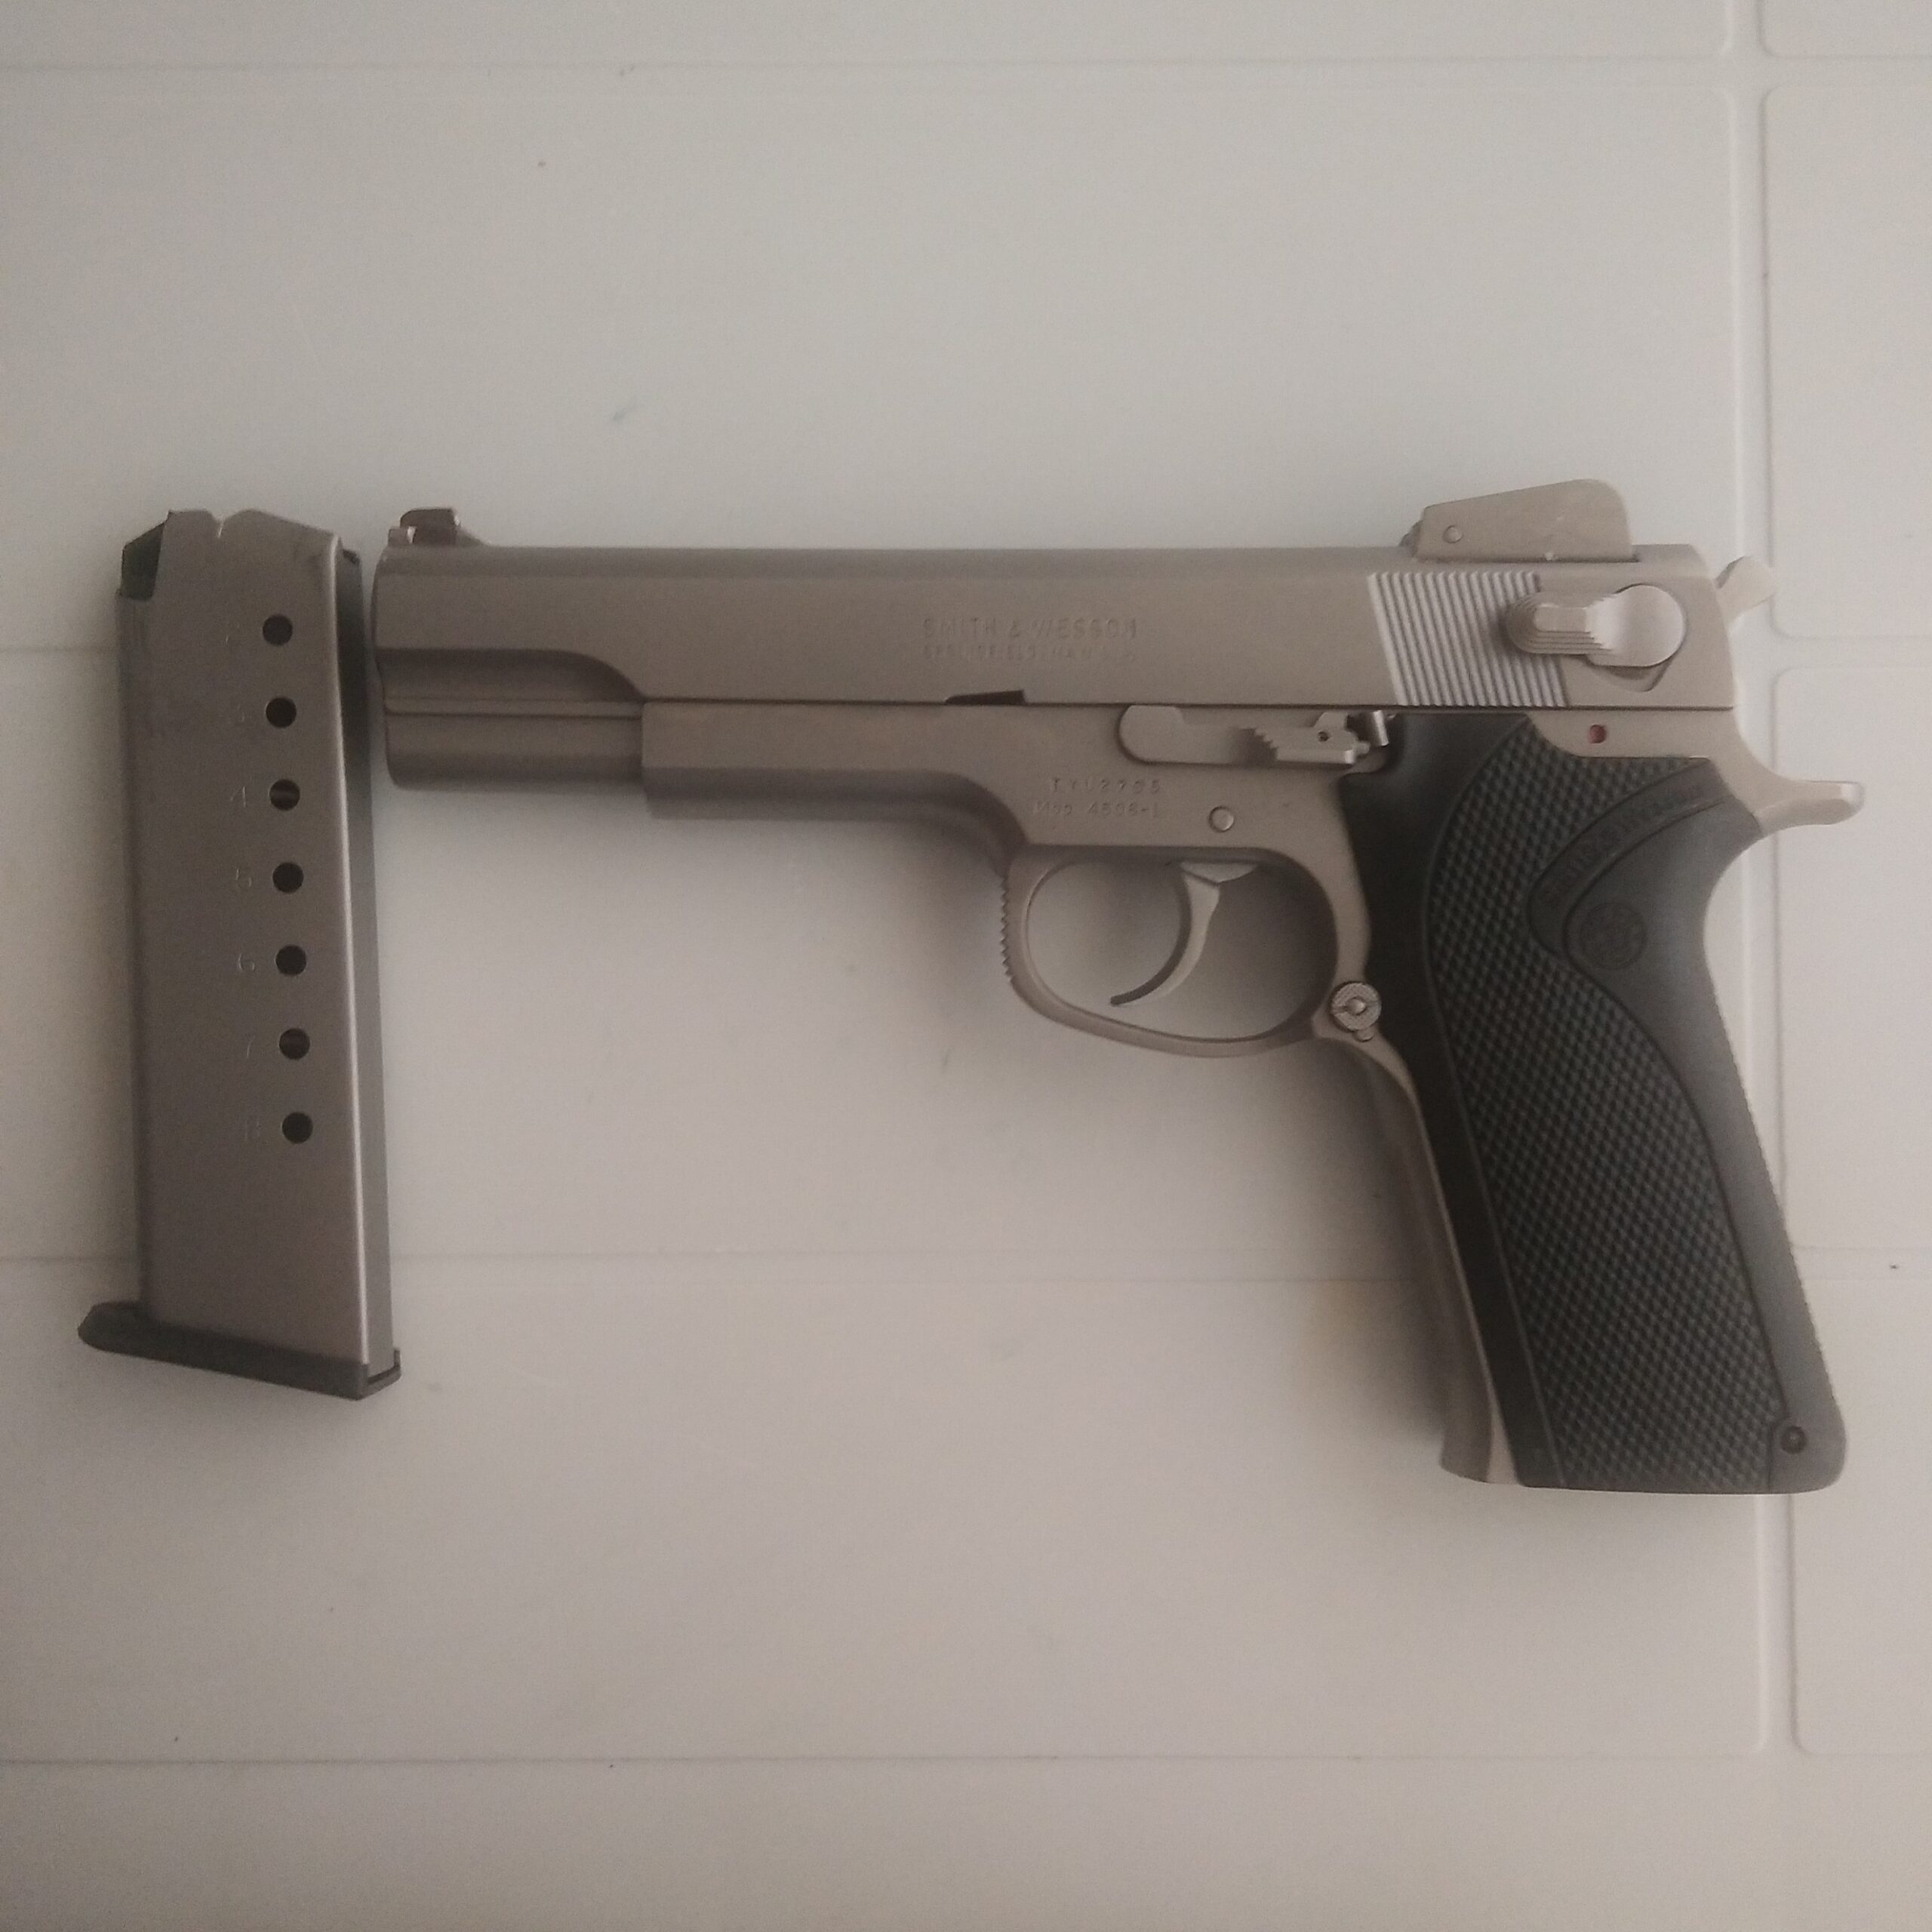 Smith&wesson 4506(45cal)